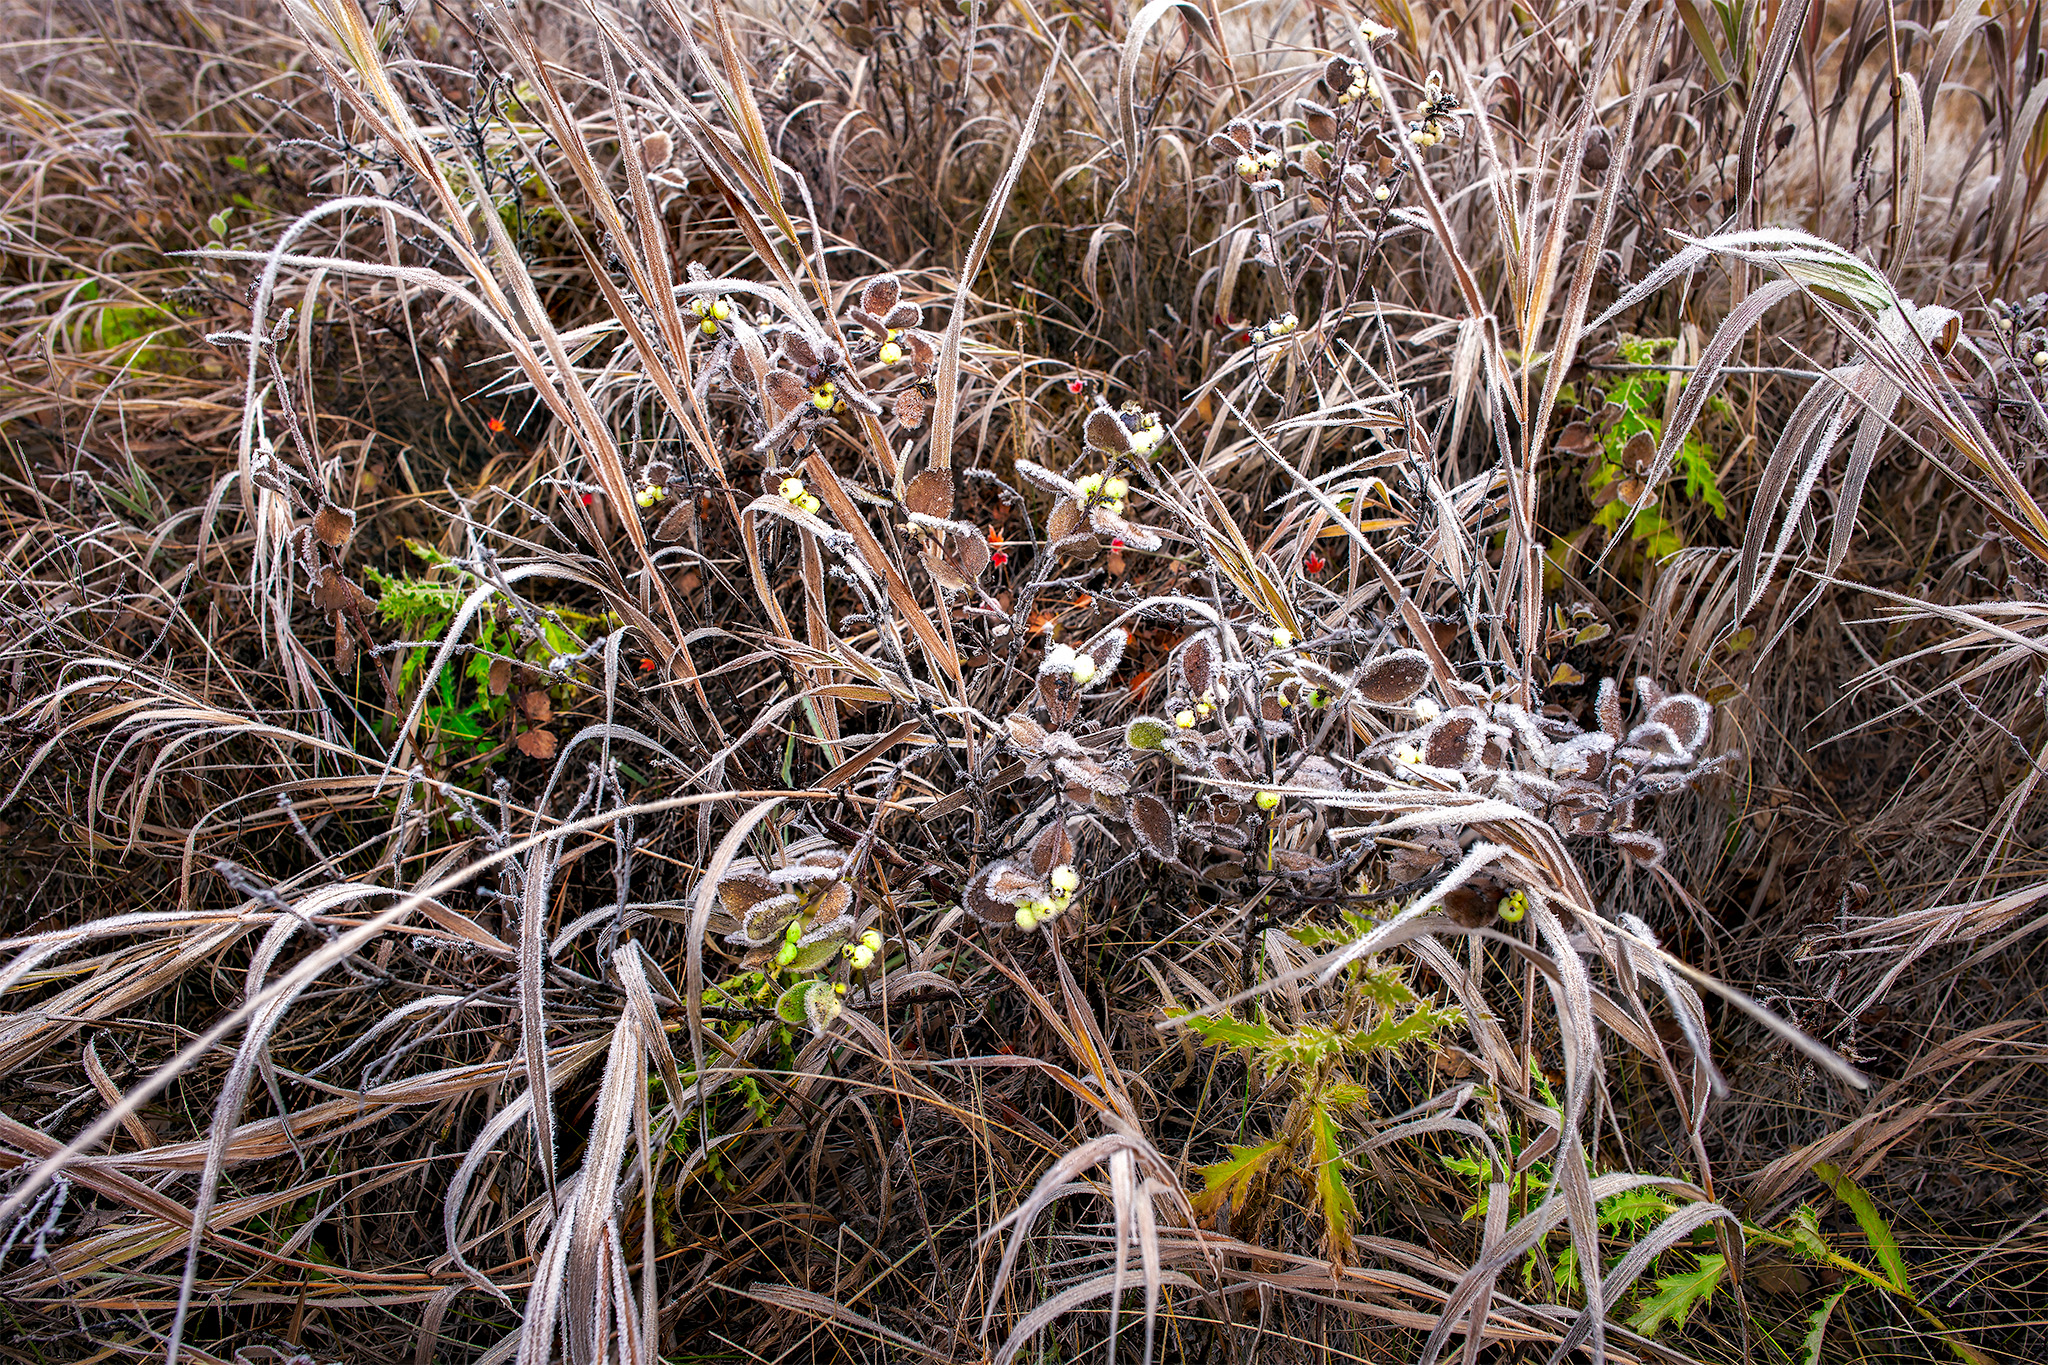 A thin layer of frost covers some berries and Saskatchewan grasses in fall